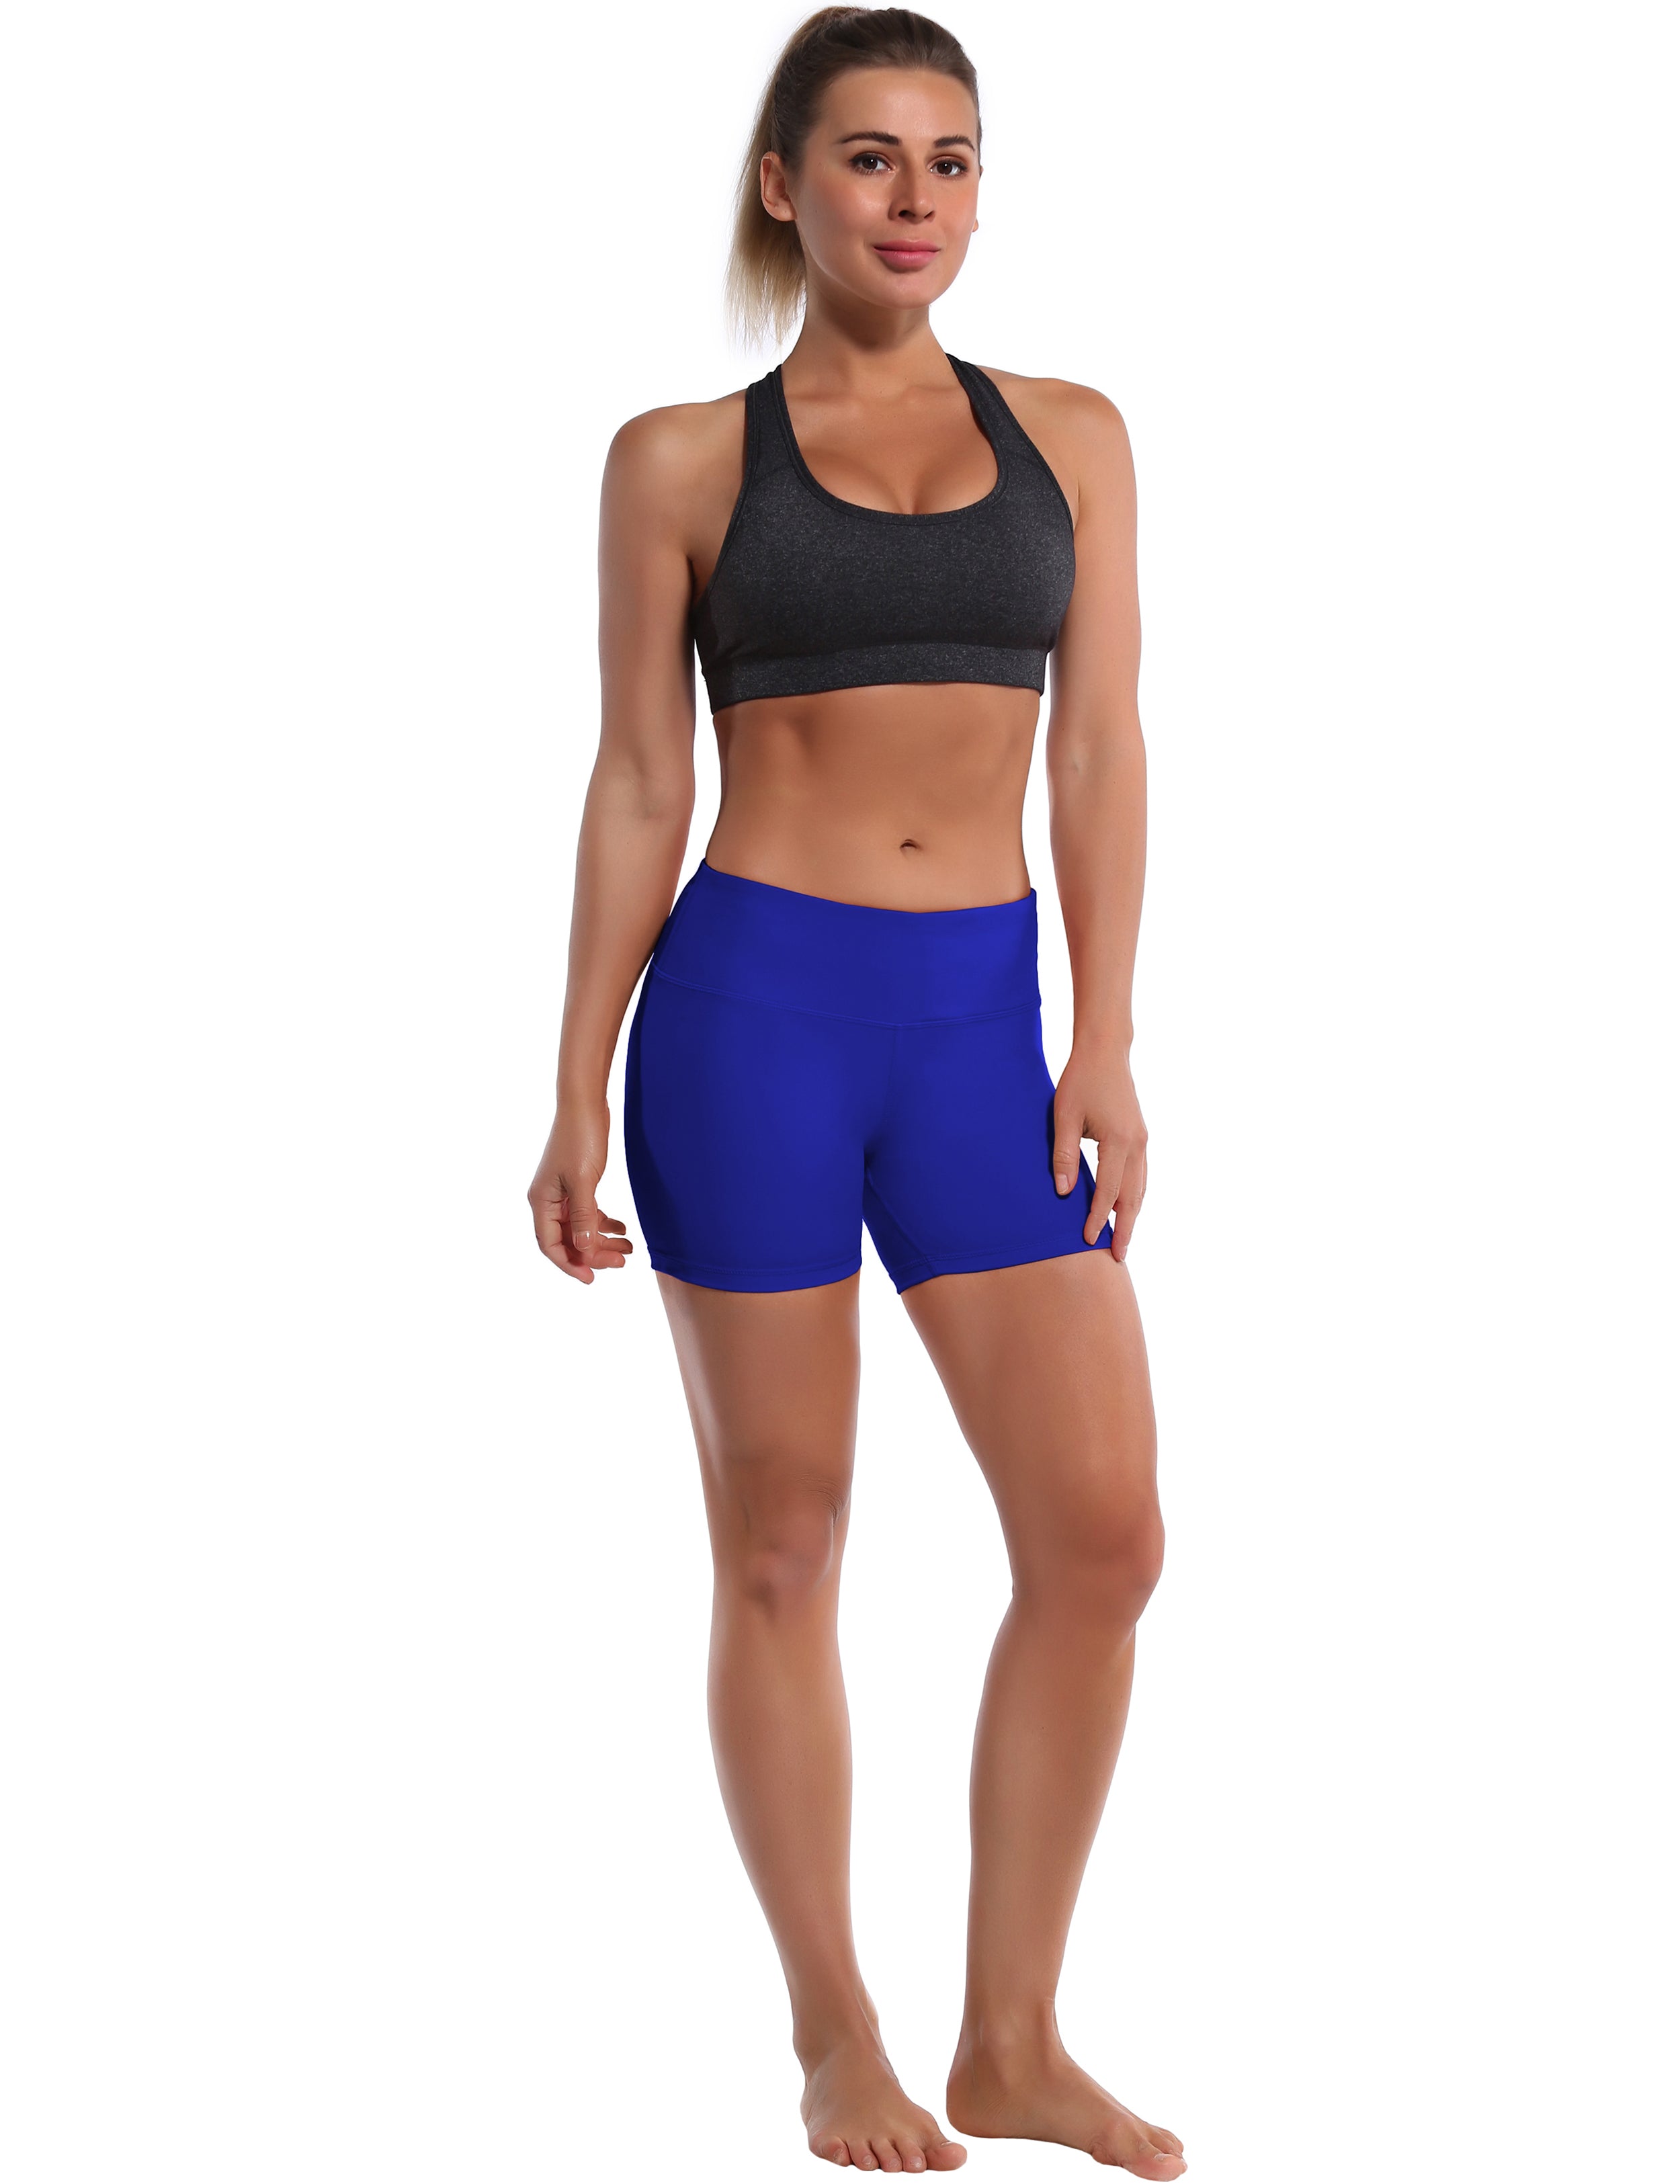 4" Yoga Shorts navy Sleek, soft, smooth and totally comfortable: our newest style is here. Softest-ever fabric High elasticity High density 4-way stretch Fabric doesn't attract lint easily No see-through Moisture-wicking Machine wash 75% Nylon, 25% Spandex